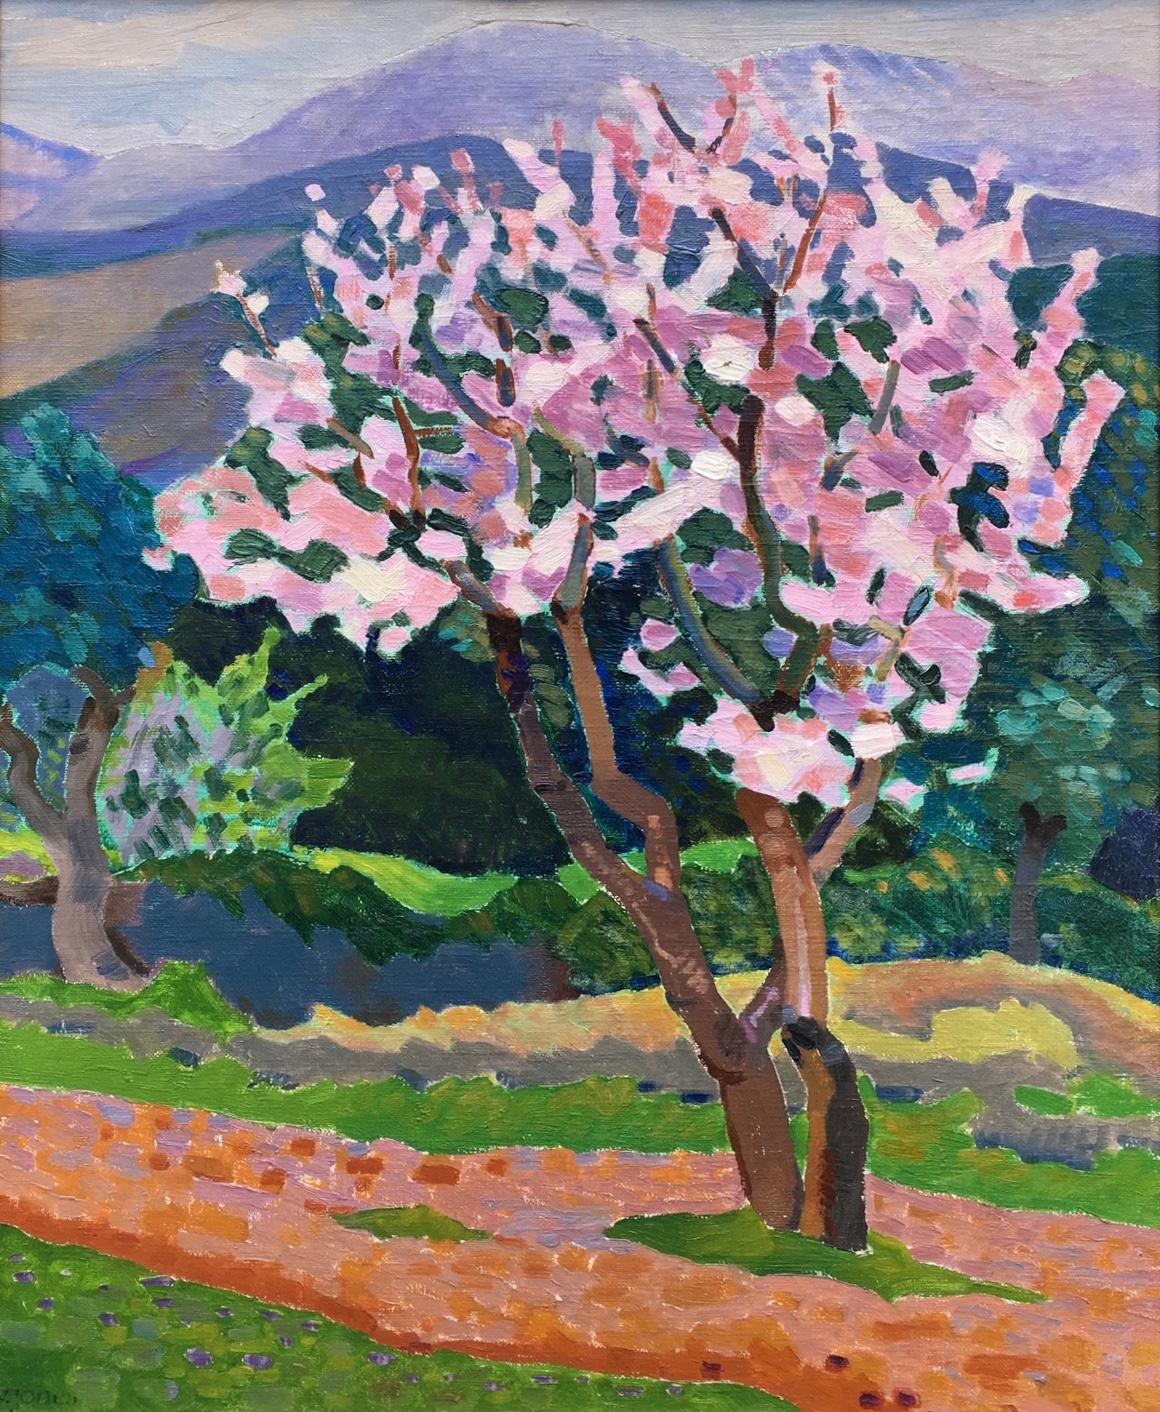 Ernest Yarrow Jones (1872-1951)
Almond blossom with the mountains beyond, Corsica,
Signed,
Oil on canvas,
21½ x 18¼ inches

The artist produced a beautiful series of blossom studies during his visit to Corsica in 1910. He exhibited the paintings